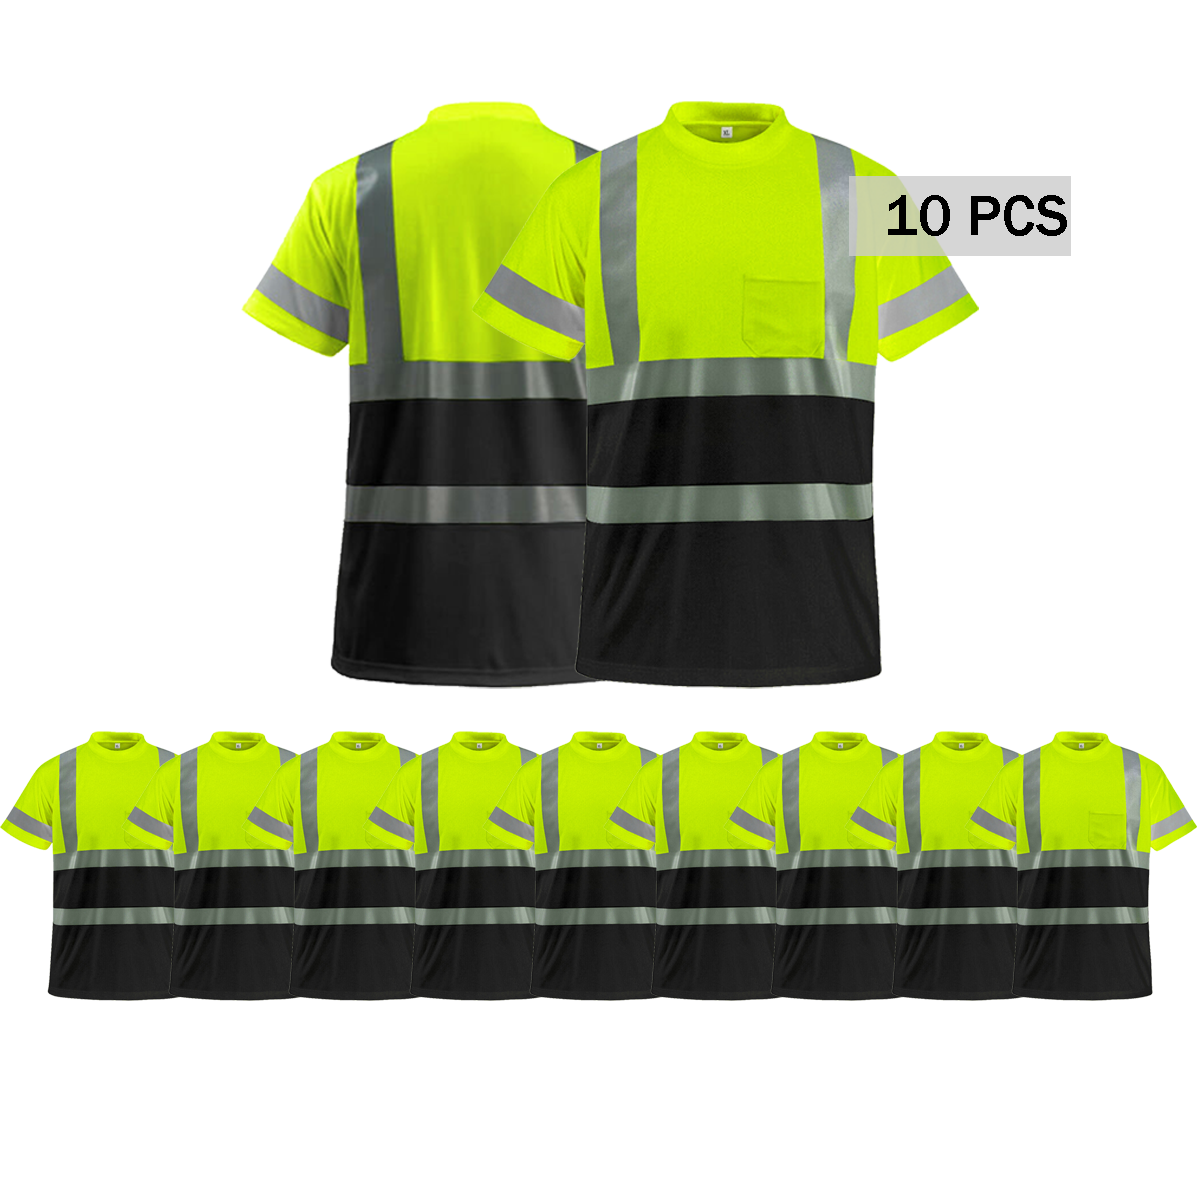 10 pack safety shirt yellow and black